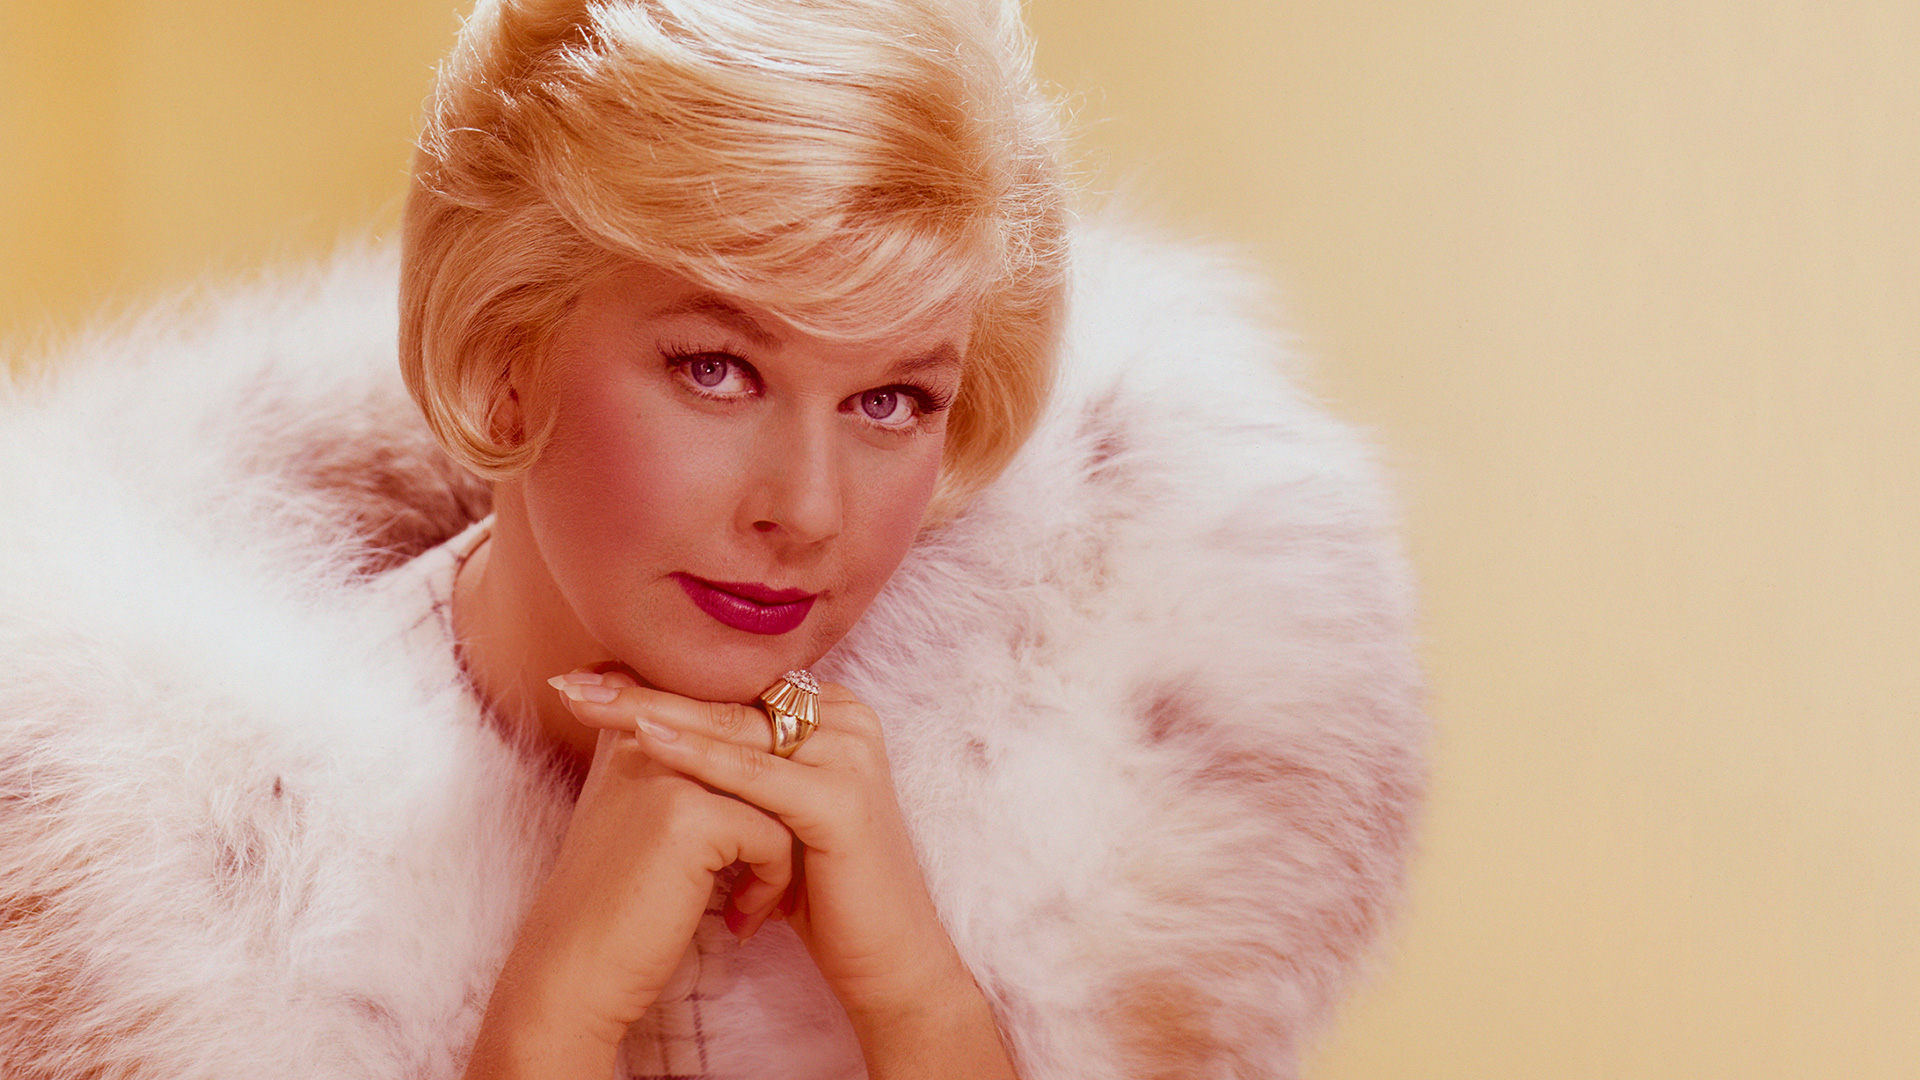 April 3, 1922: Hollywood Legend and Animal Rights Activist Doris Day Was Born